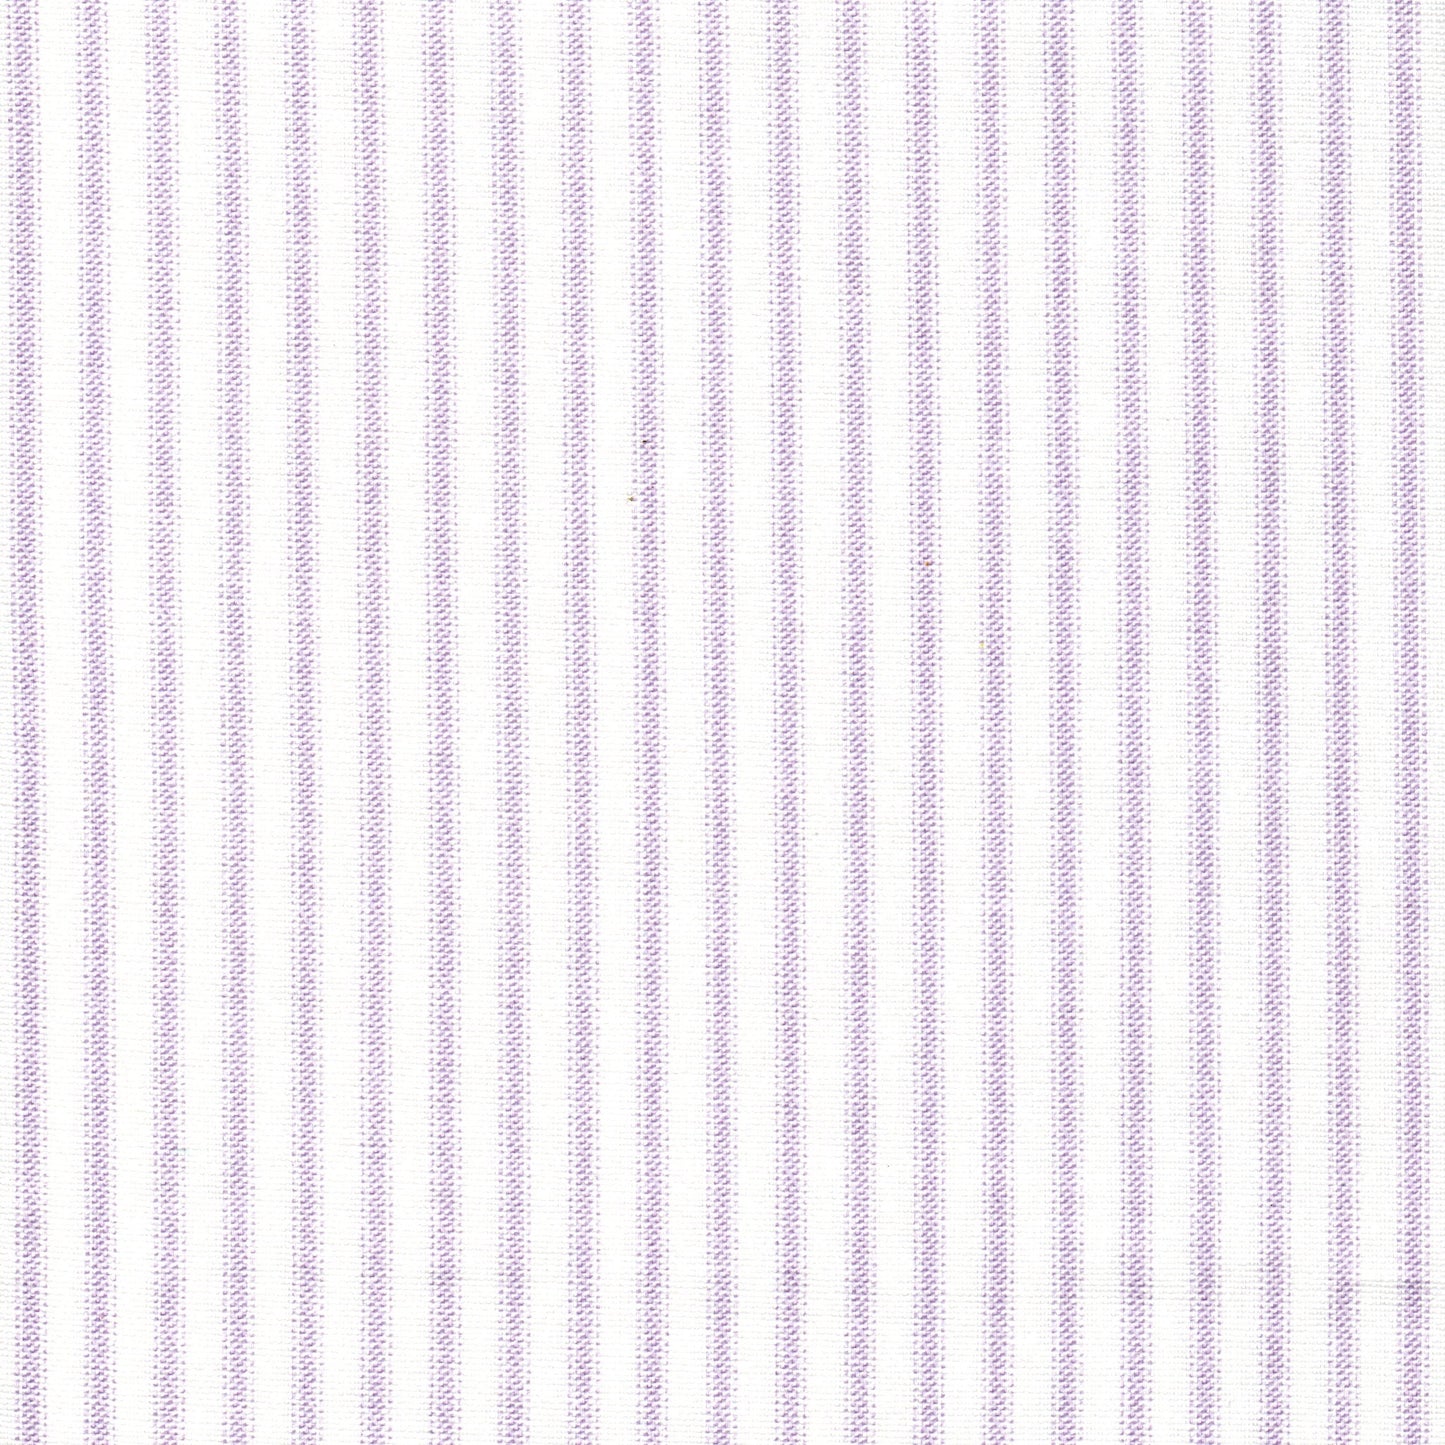 Pinch Pleated Curtains in Classic Orchid Lavender Ticking Stripe on White